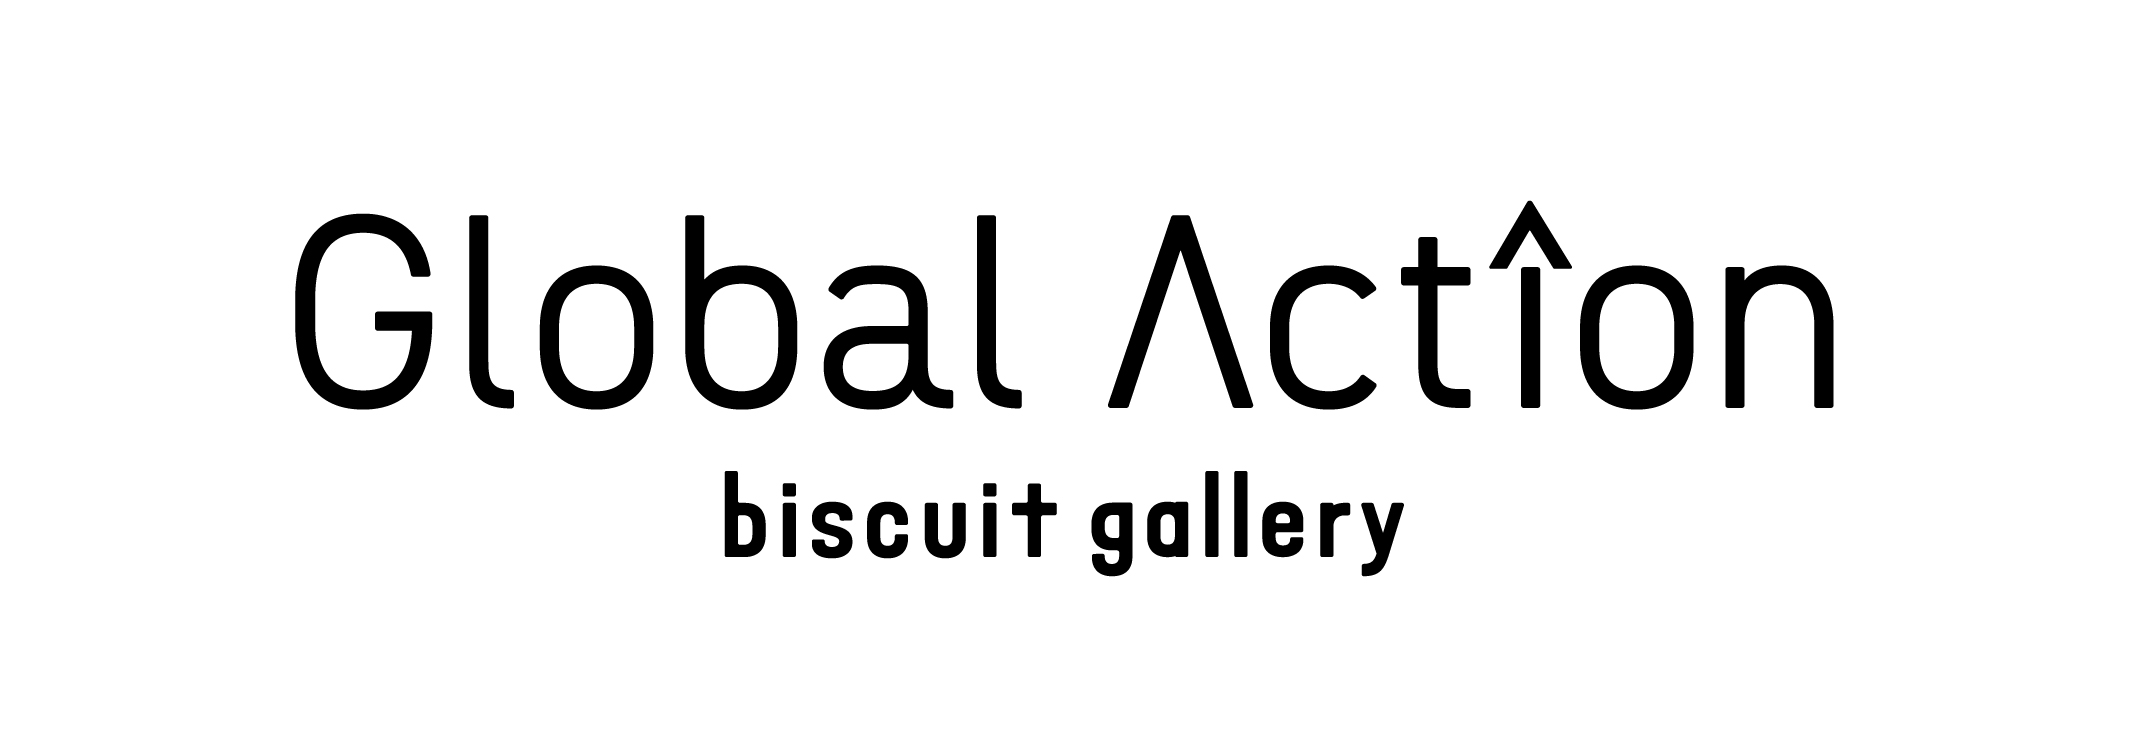 【News】biscuit gallery “Global Action”